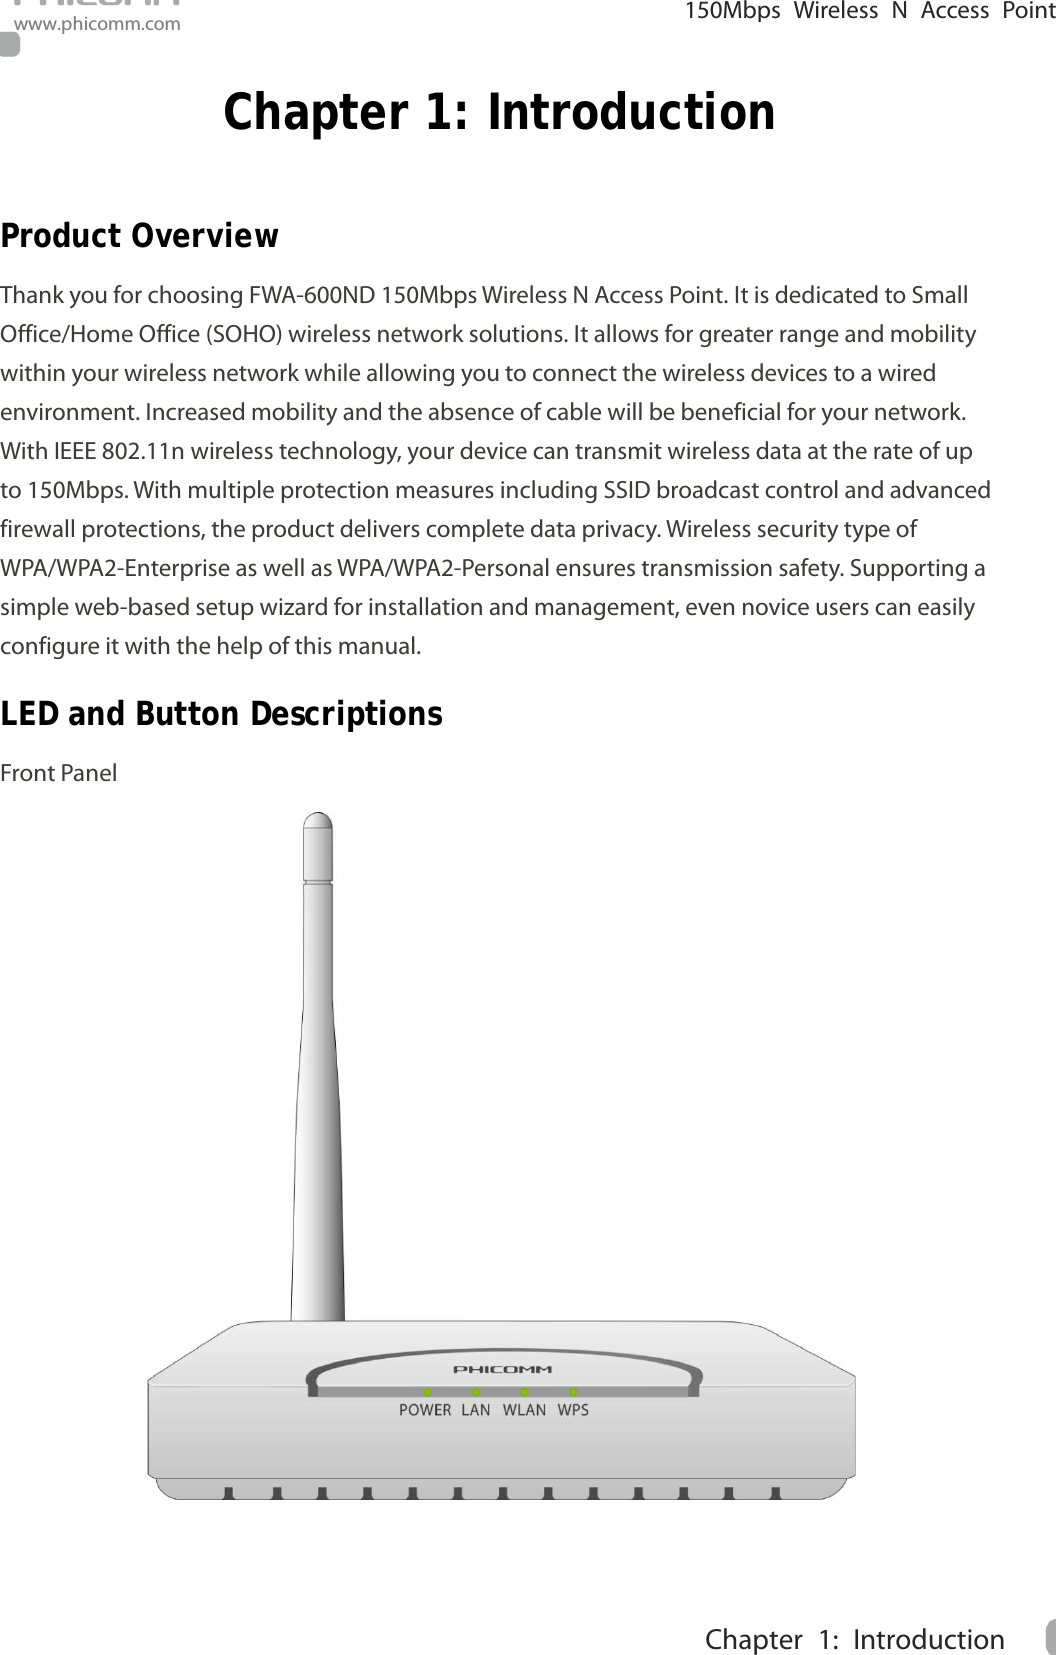                                                            150Mbps Wireless N Access Point www.phicomm.com 1 Chapter 1: Introduction  Chapter 1: Introduction Product Overview Thank you for choosing FWA-600ND 150Mbps Wireless N Access Point. It is dedicated to Small Office/Home Office (SOHO) wireless network solutions. It allows for greater range and mobility within your wireless network while allowing you to connect the wireless devices to a wired environment. Increased mobility and the absence of cable will be beneficial for your network. With IEEE 802.11n wireless technology, your device can transmit wireless data at the rate of up to 150Mbps. With multiple protection measures including SSID broadcast control and advanced firewall protections, the product delivers complete data privacy. Wireless security type of WPA/WPA2-Enterprise as well as WPA/WPA2-Personal ensures transmission safety. Supporting a simple web-based setup wizard for installation and management, even novice users can easily configure it with the help of this manual.   LED and Button Descriptions Front Panel  